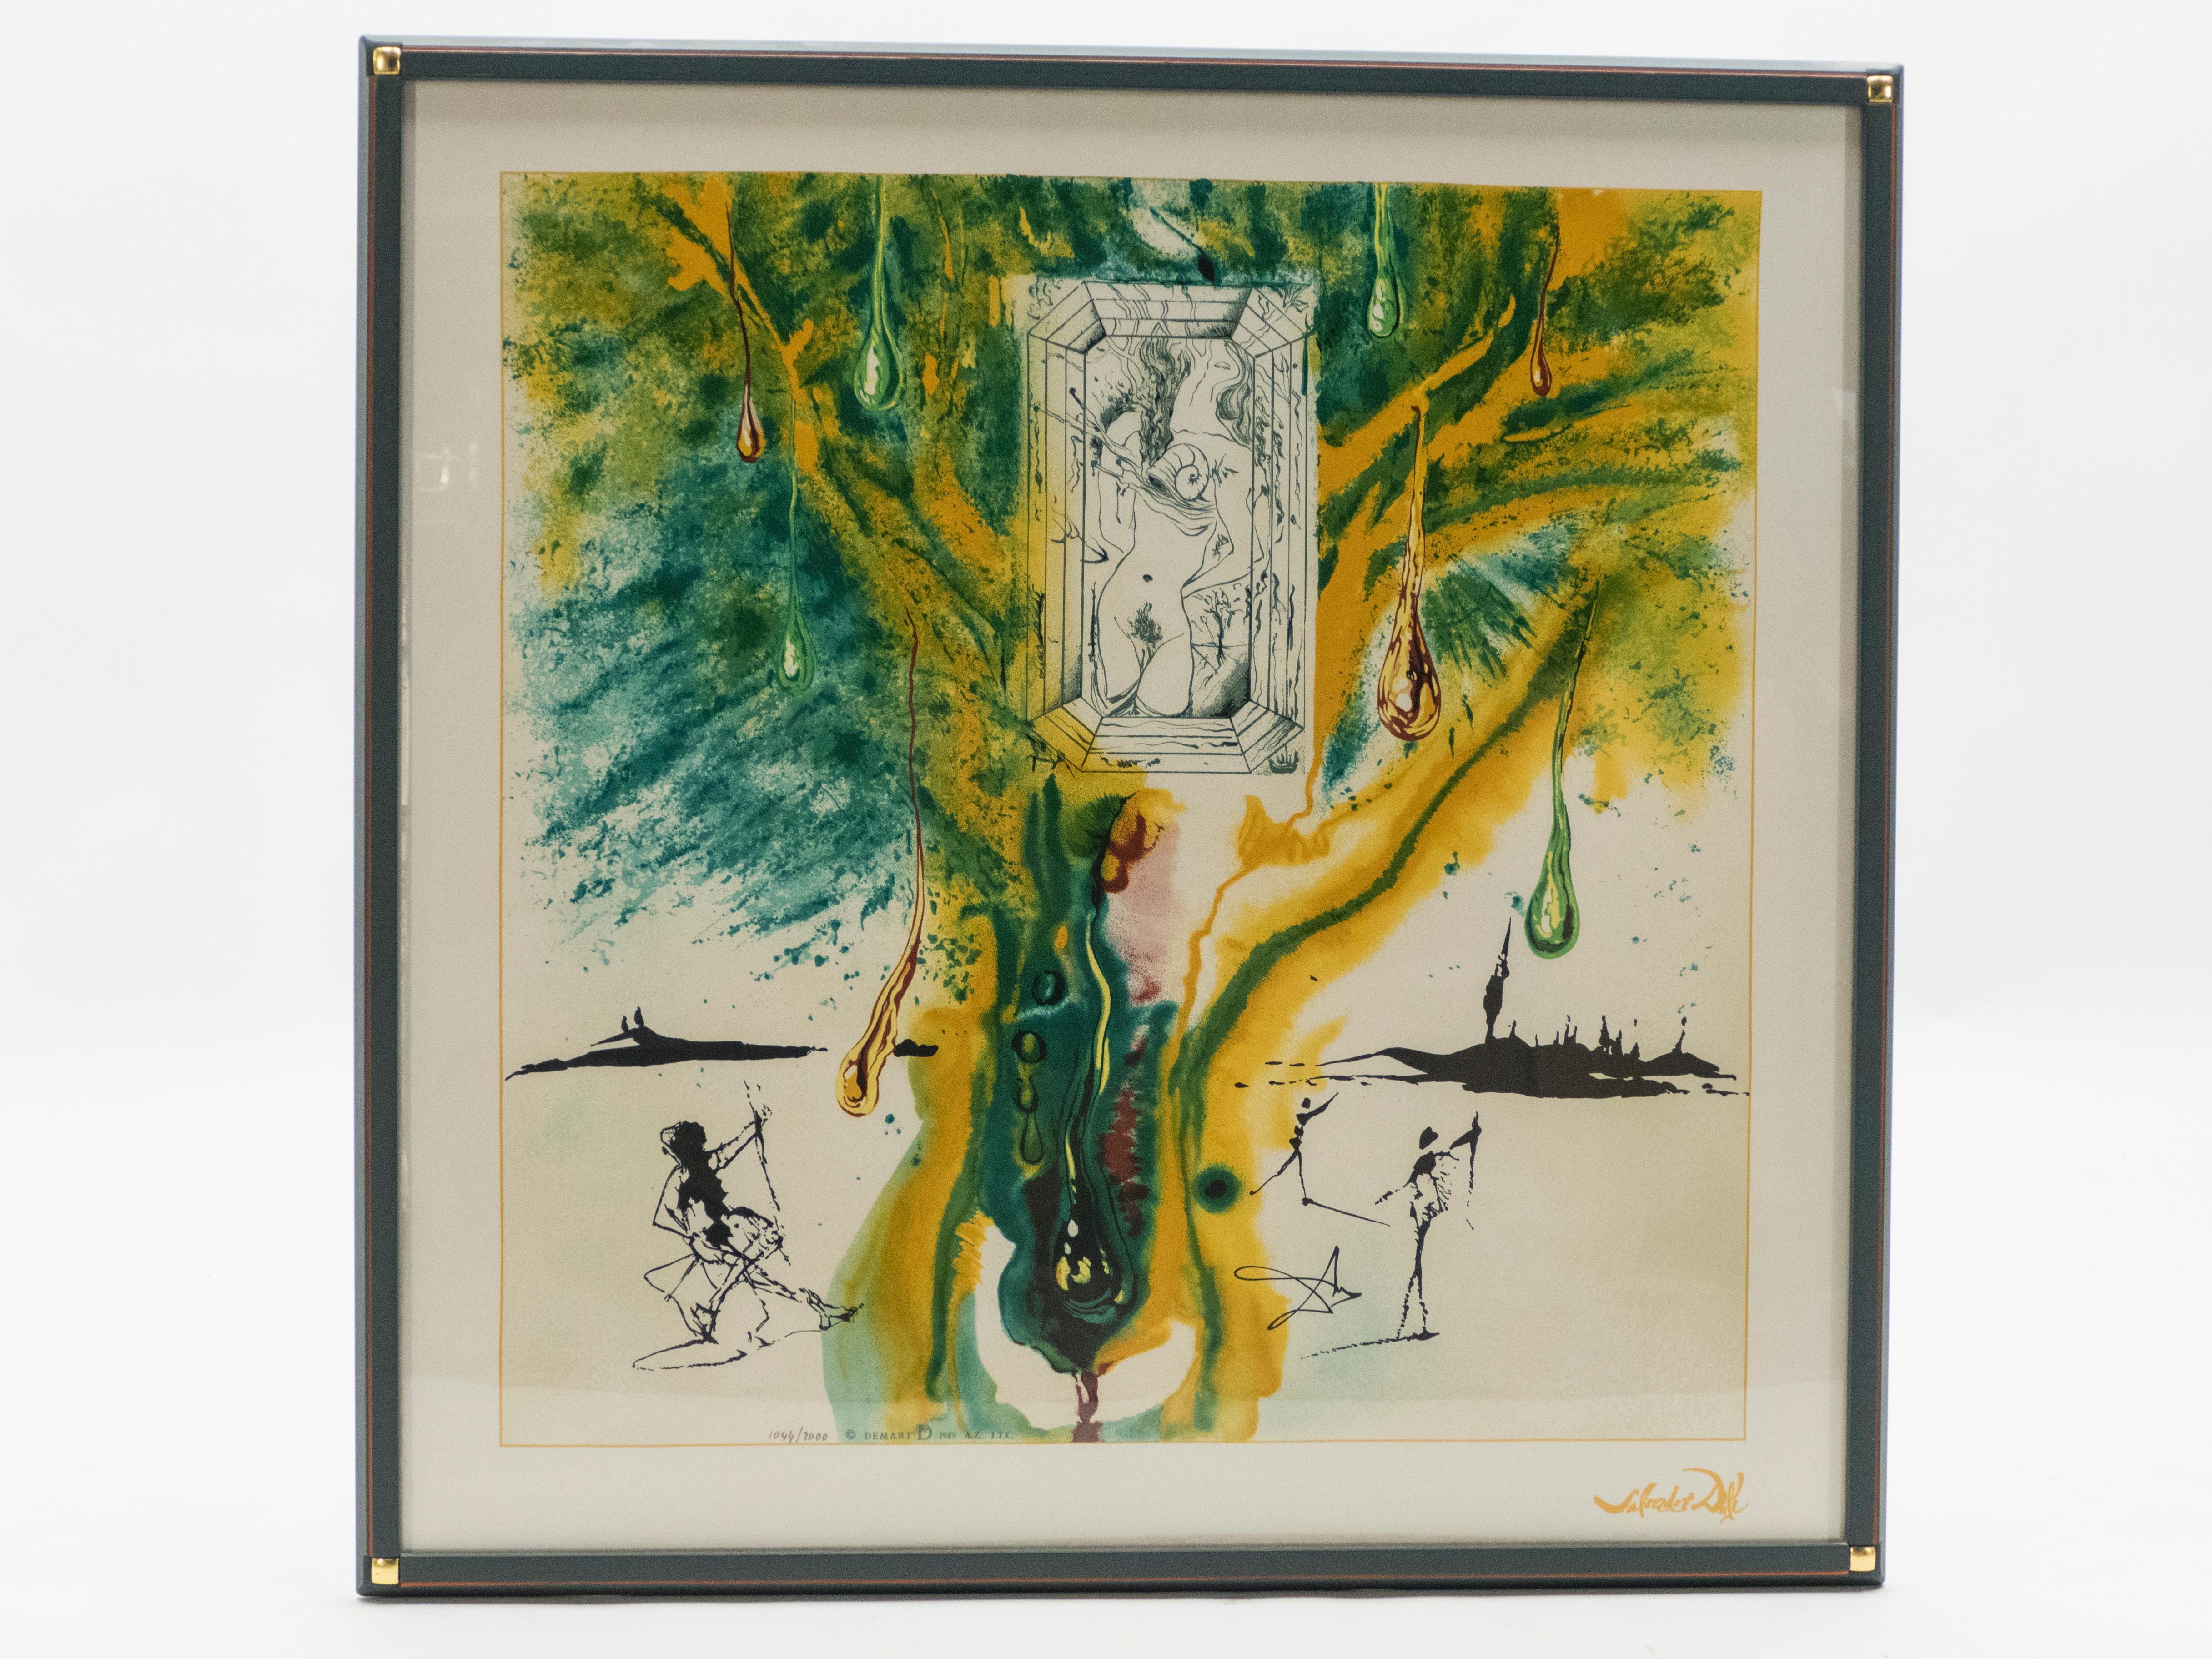 Beautiful Salvador Dali surrealist serigraphy on silk from the series “Alchemy of the Philosophers” in 1976. This is the number 1044 of an edition of 2000 by Demart from 1989. Dimensions of the frame: H 37 in. x W 37 in. 
  